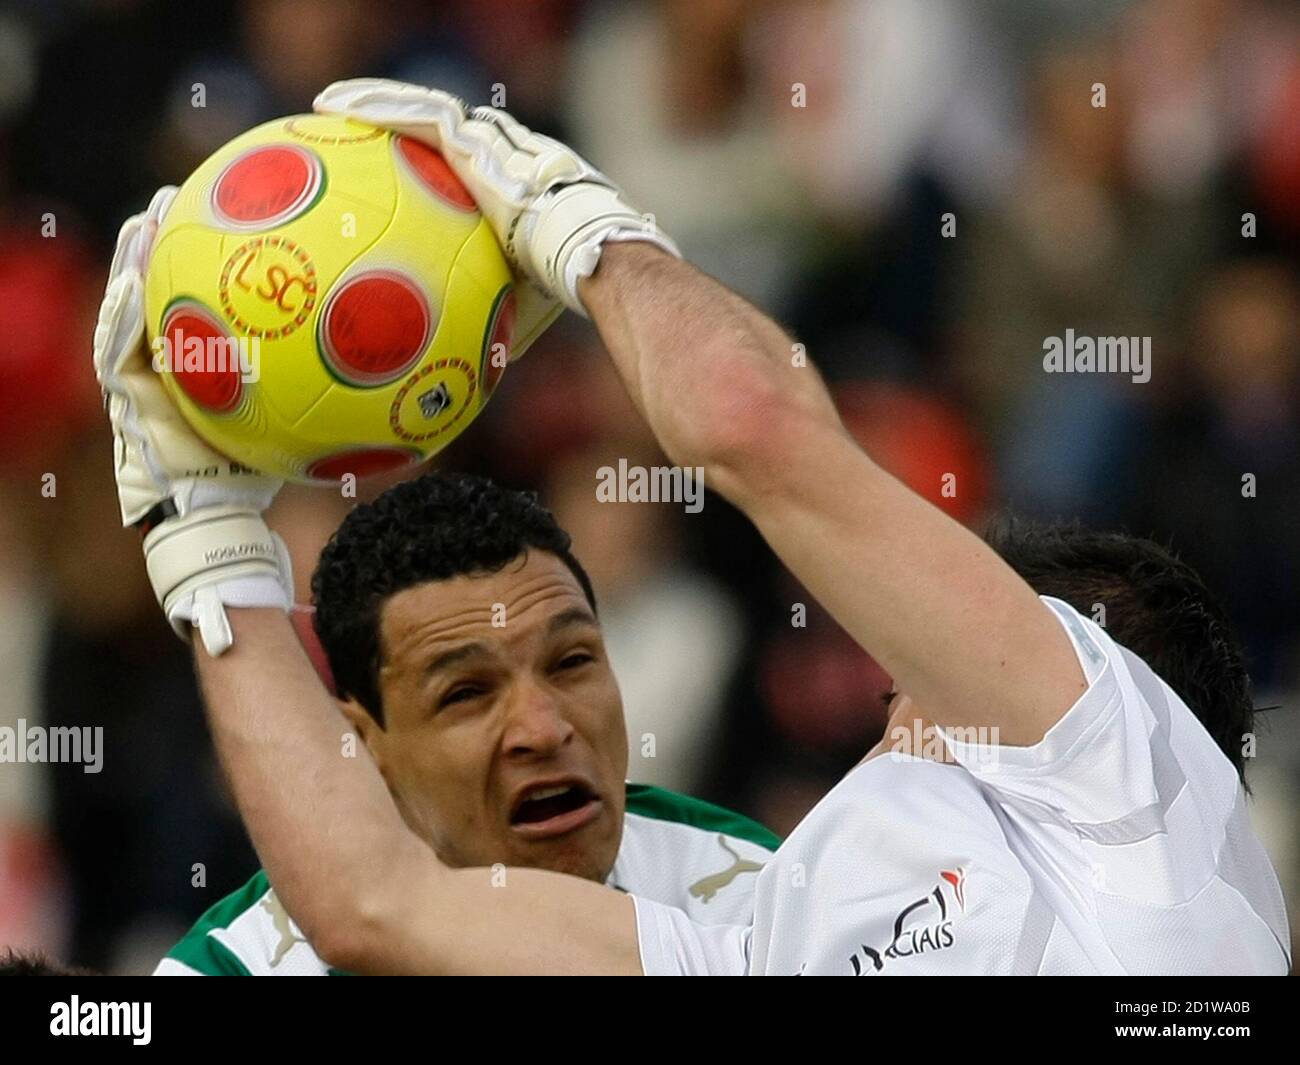 Leixoes' goalkeeper Beto (R) fights for the ball with Sporting Lisboa's  Derlei Fernandes during their Portuguese Premier League soccer match at Mar  stadium in Leixoes April 5, 2009. REUTERS/Miguel Vidal (PORTUGAL SPORT